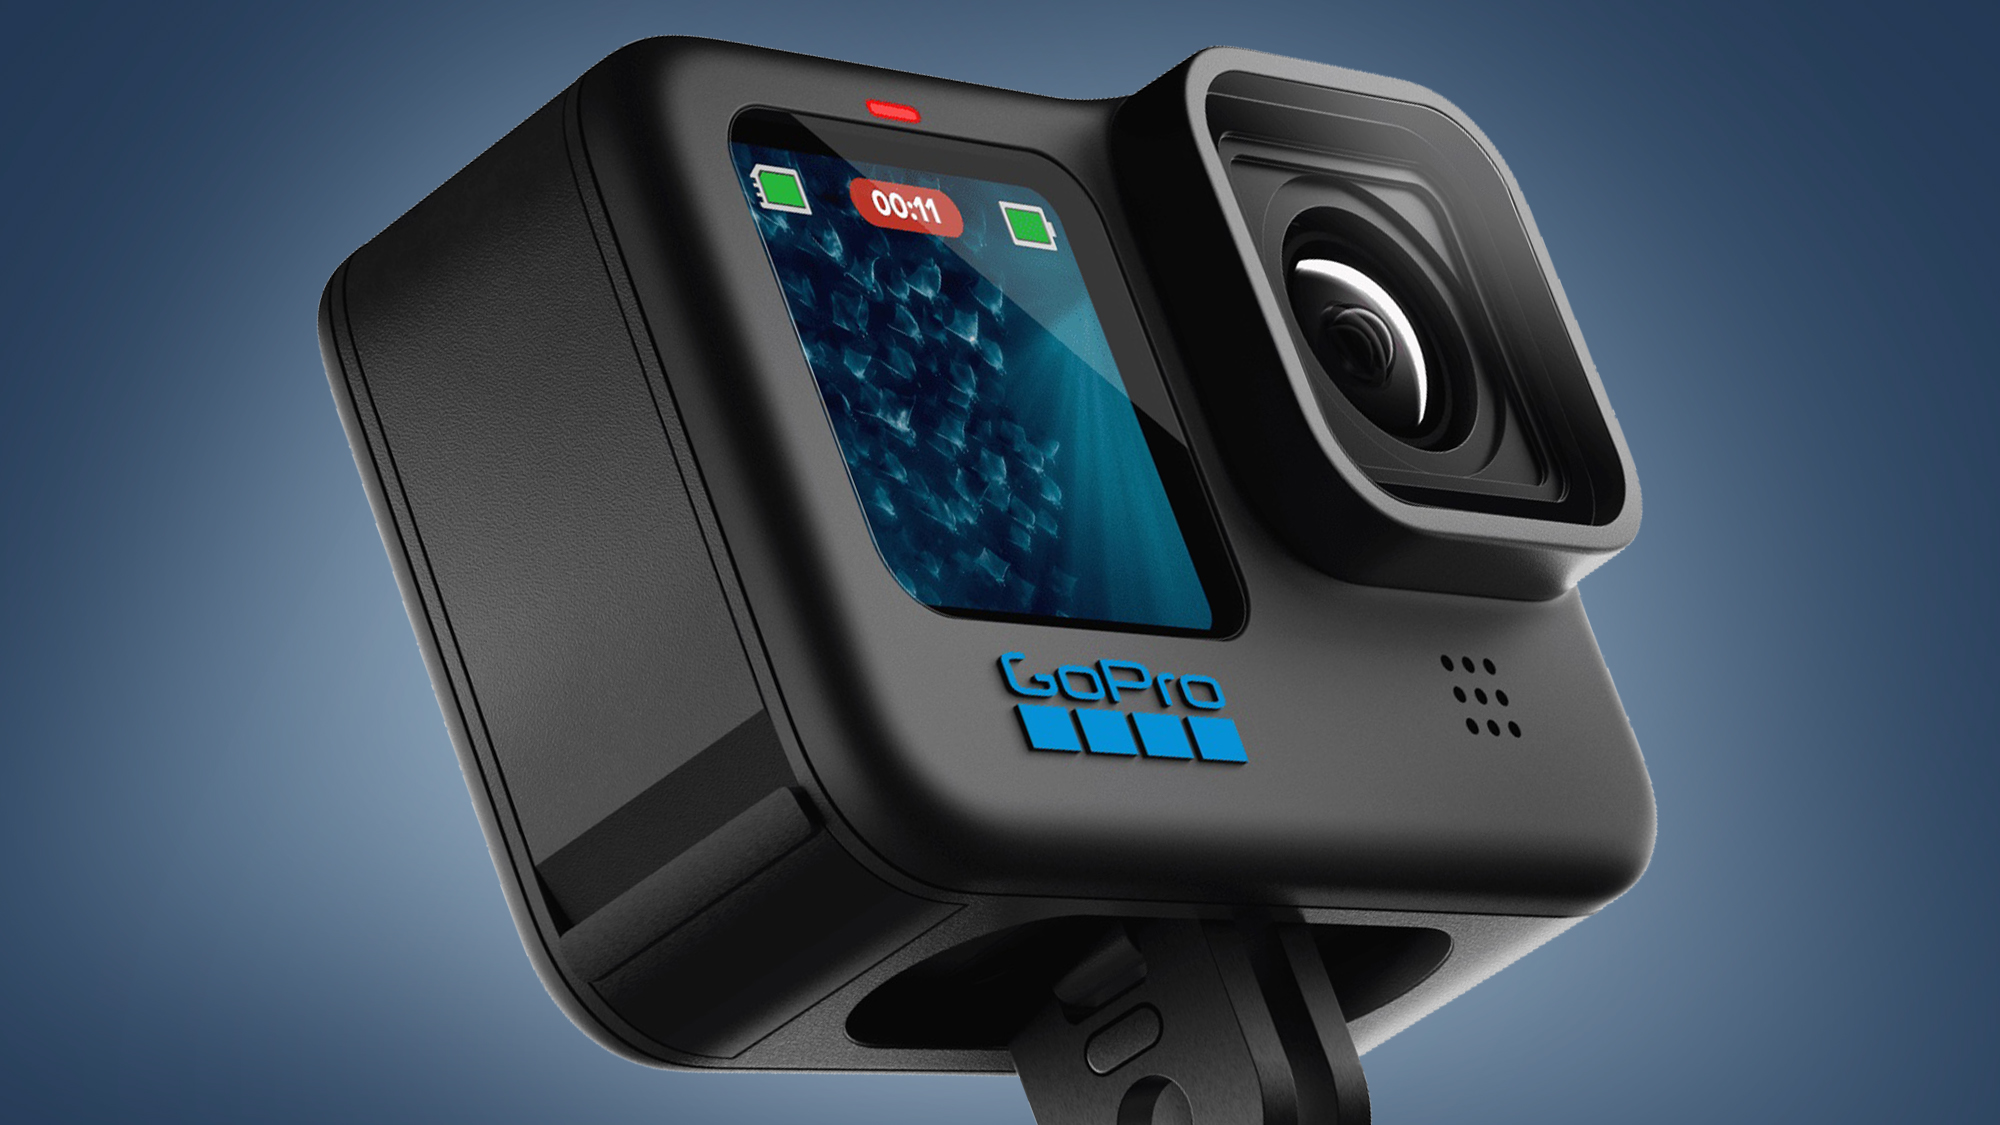 GoPro Hero 12 Black release date, specs and everything you need to know